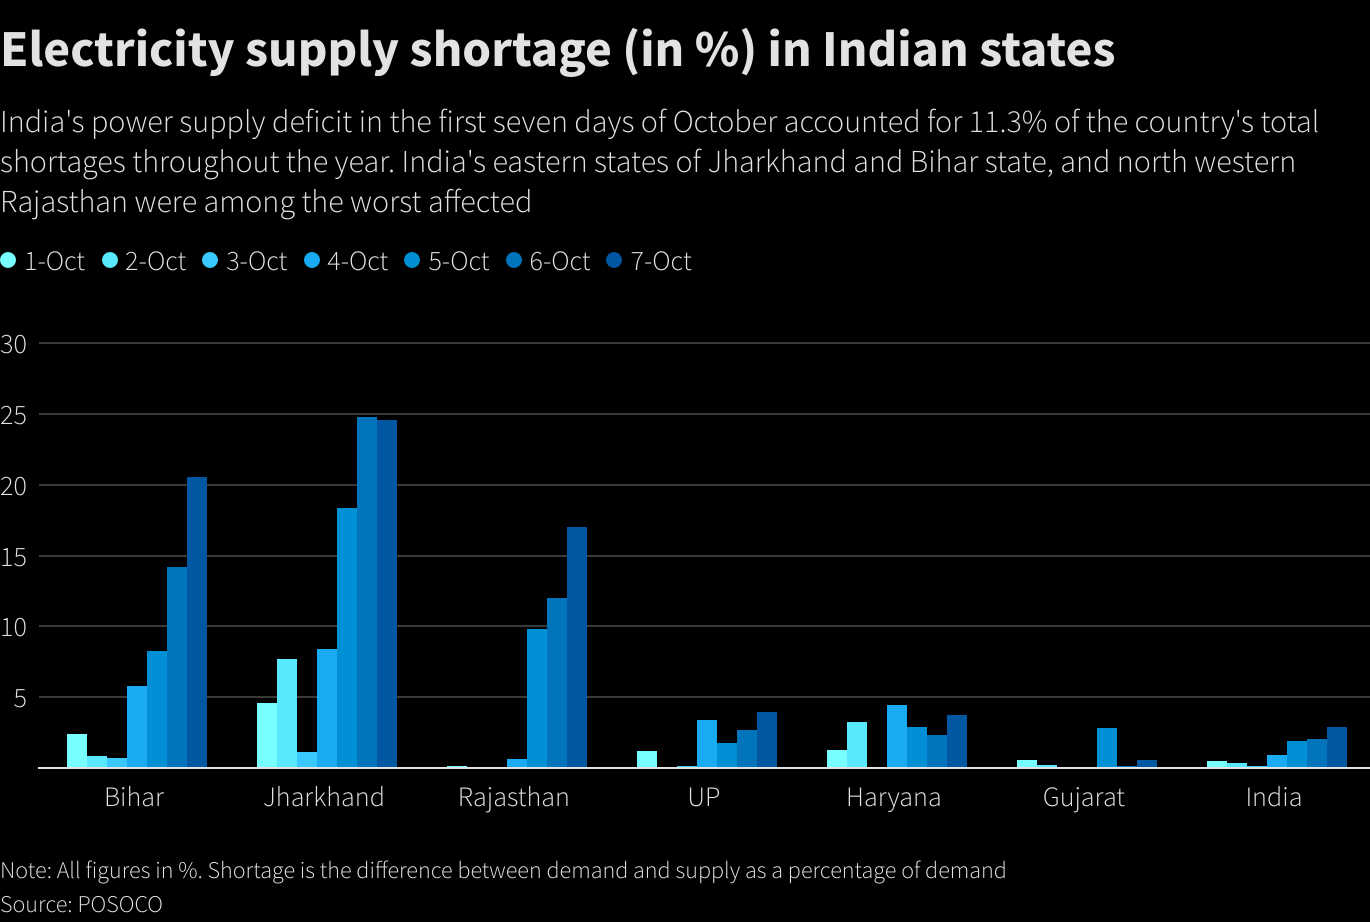 Electricity supply shortage (in %) in Indian states